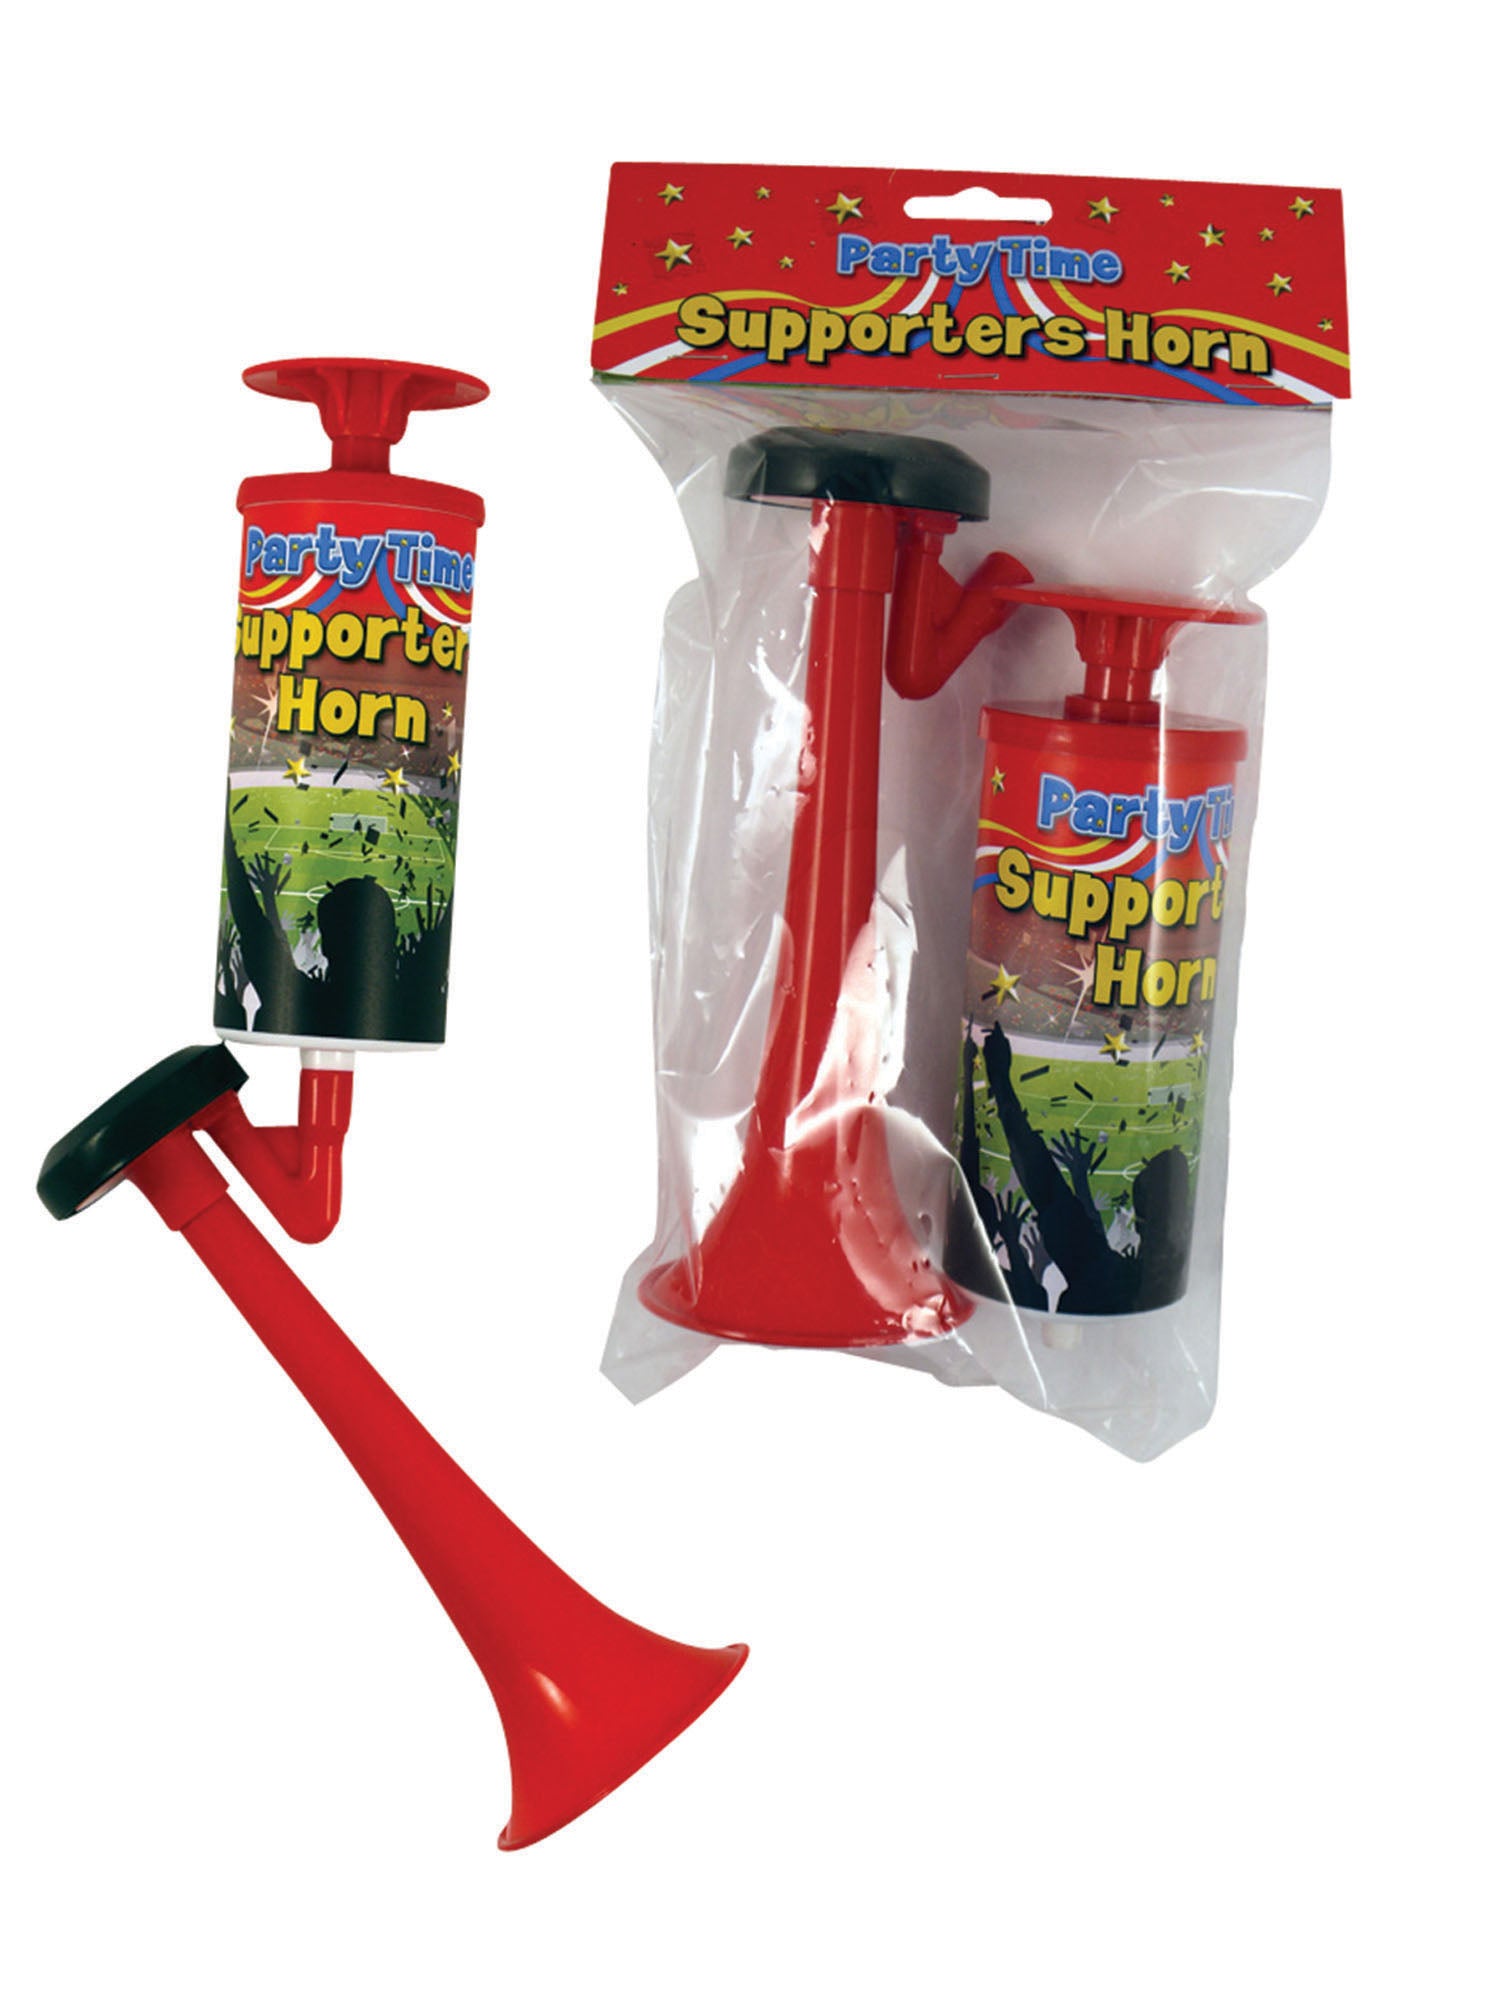 Air Horn, multi-colored, Generic, Joke, One Size, Front